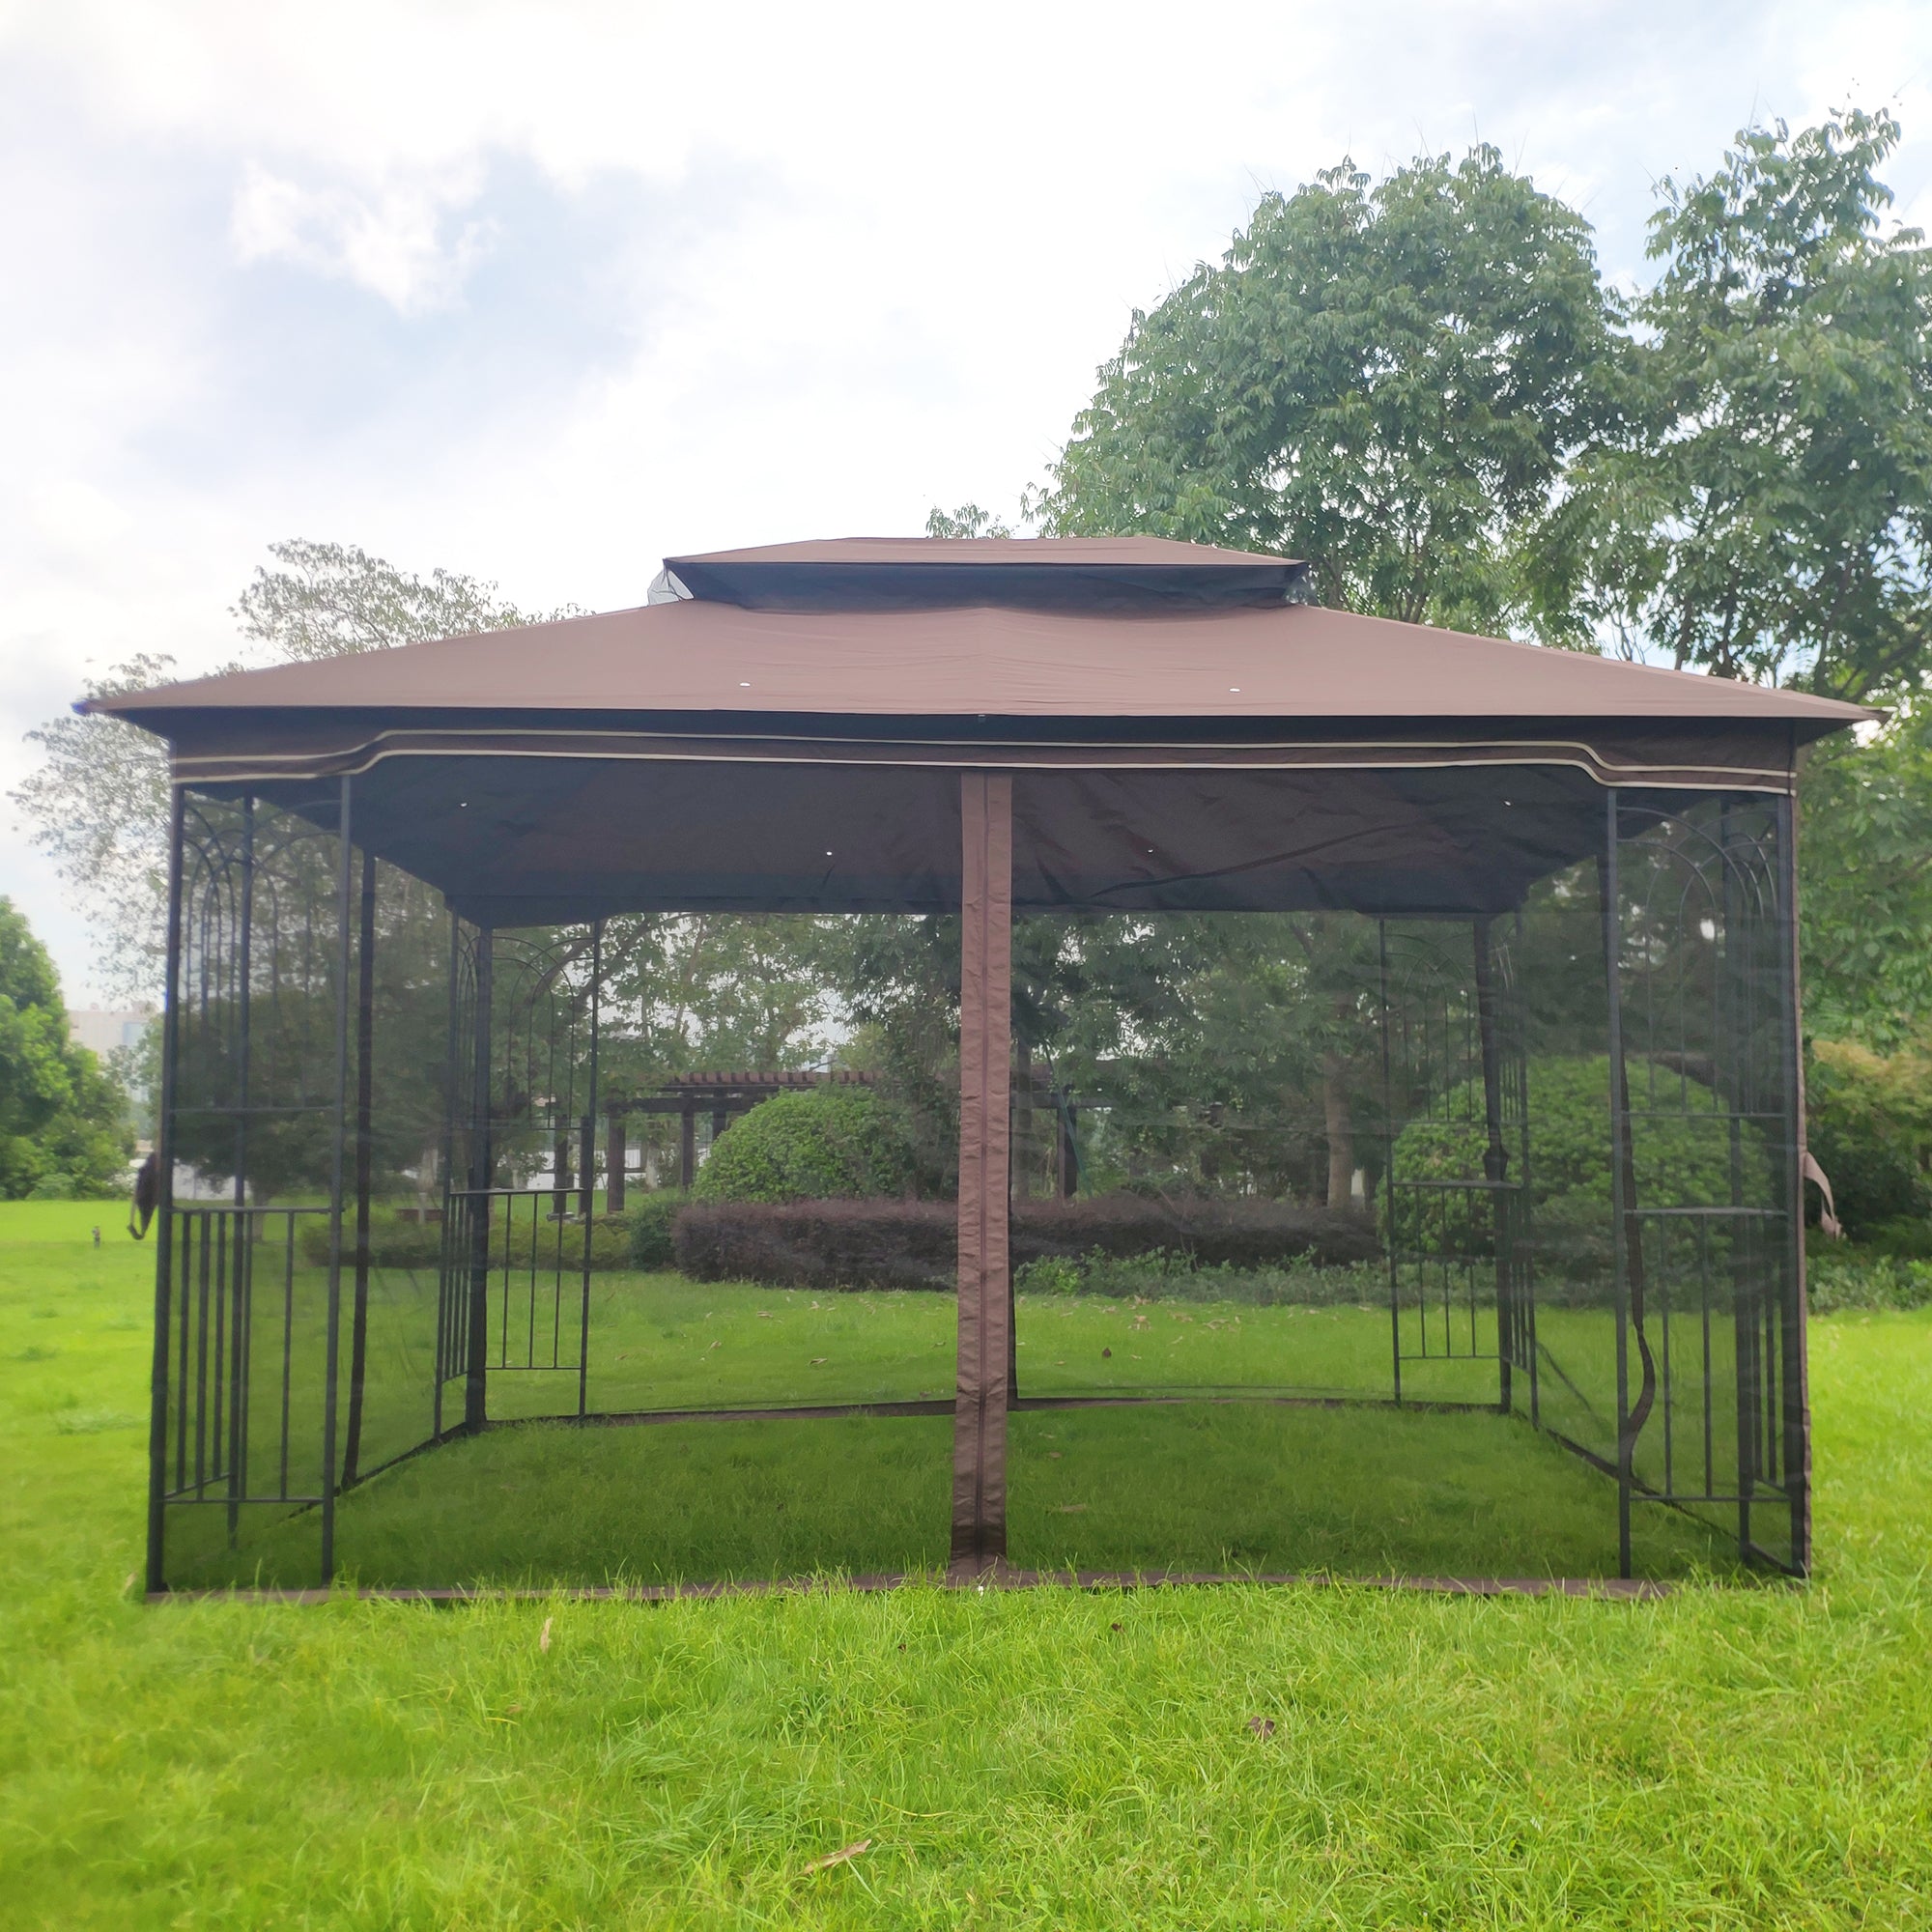 [KGORGE Plus]13 ft. x 10 ft.  Patio Gazebo Garden Canopy with Ventilated Double Roof and Mosquito net, Brown and Gray